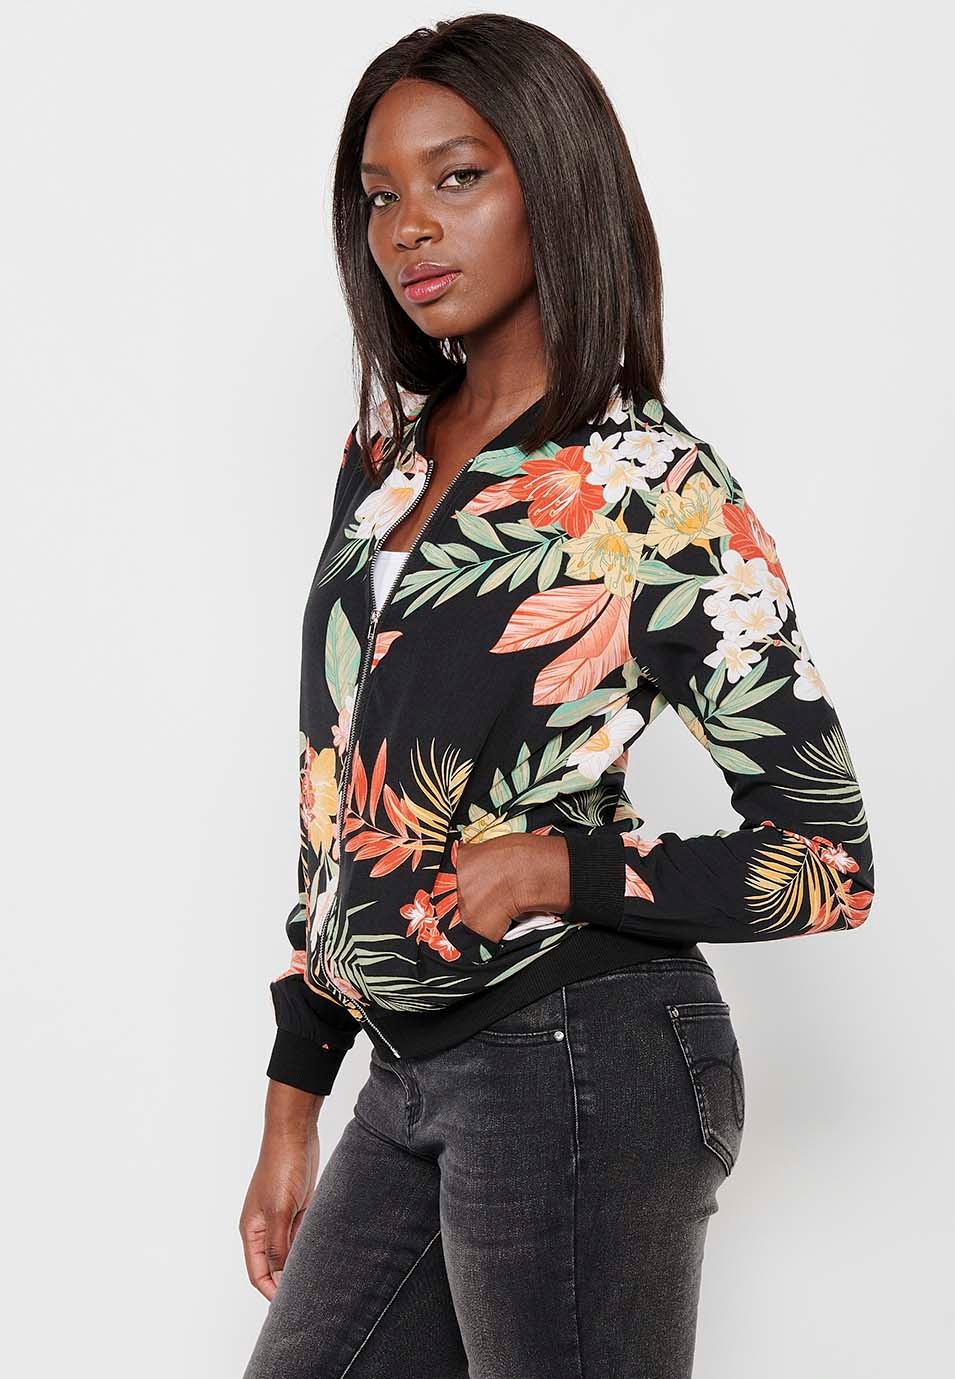 Long-sleeved sweatshirt jacket with ribbed finishes and floral print with front zipper closure in Multicolor for Women 2